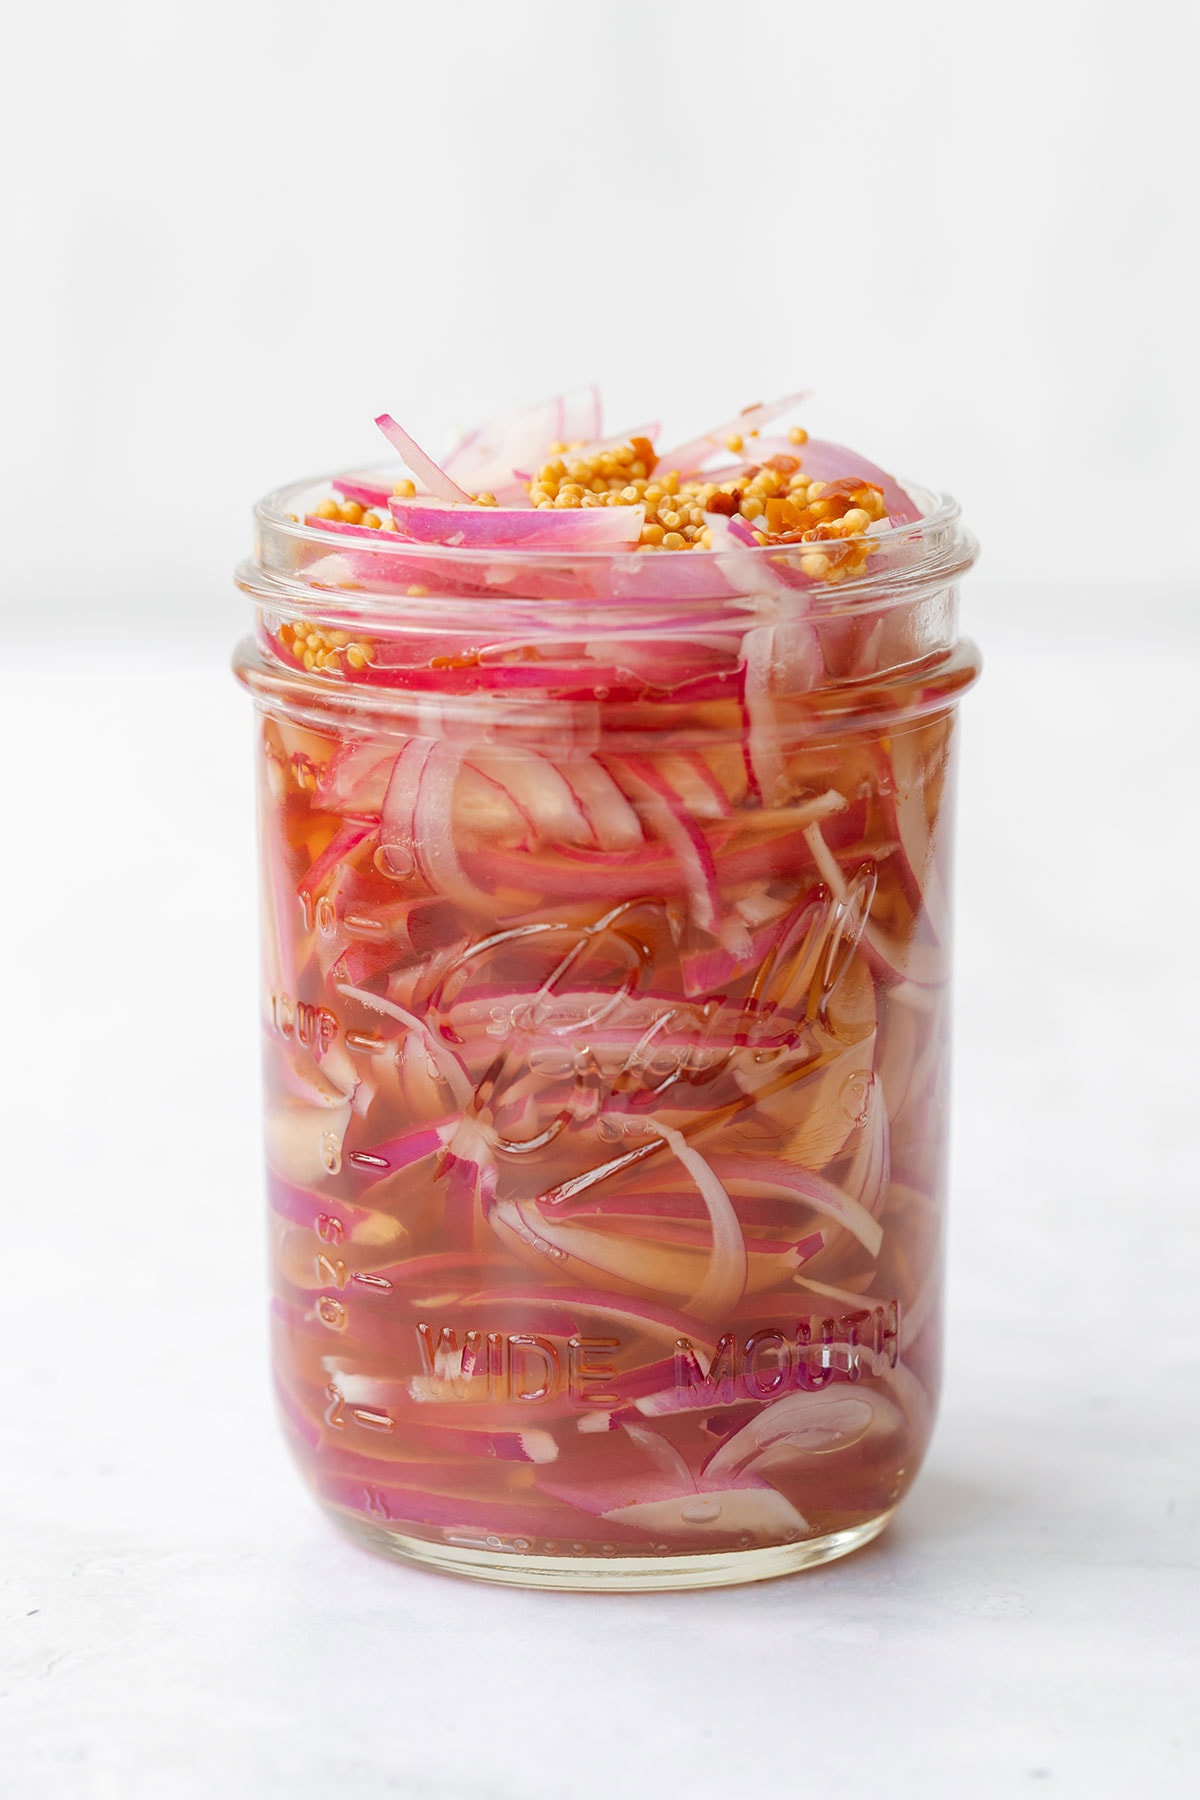 Pickled red onions in a mason jar in front of a white background.